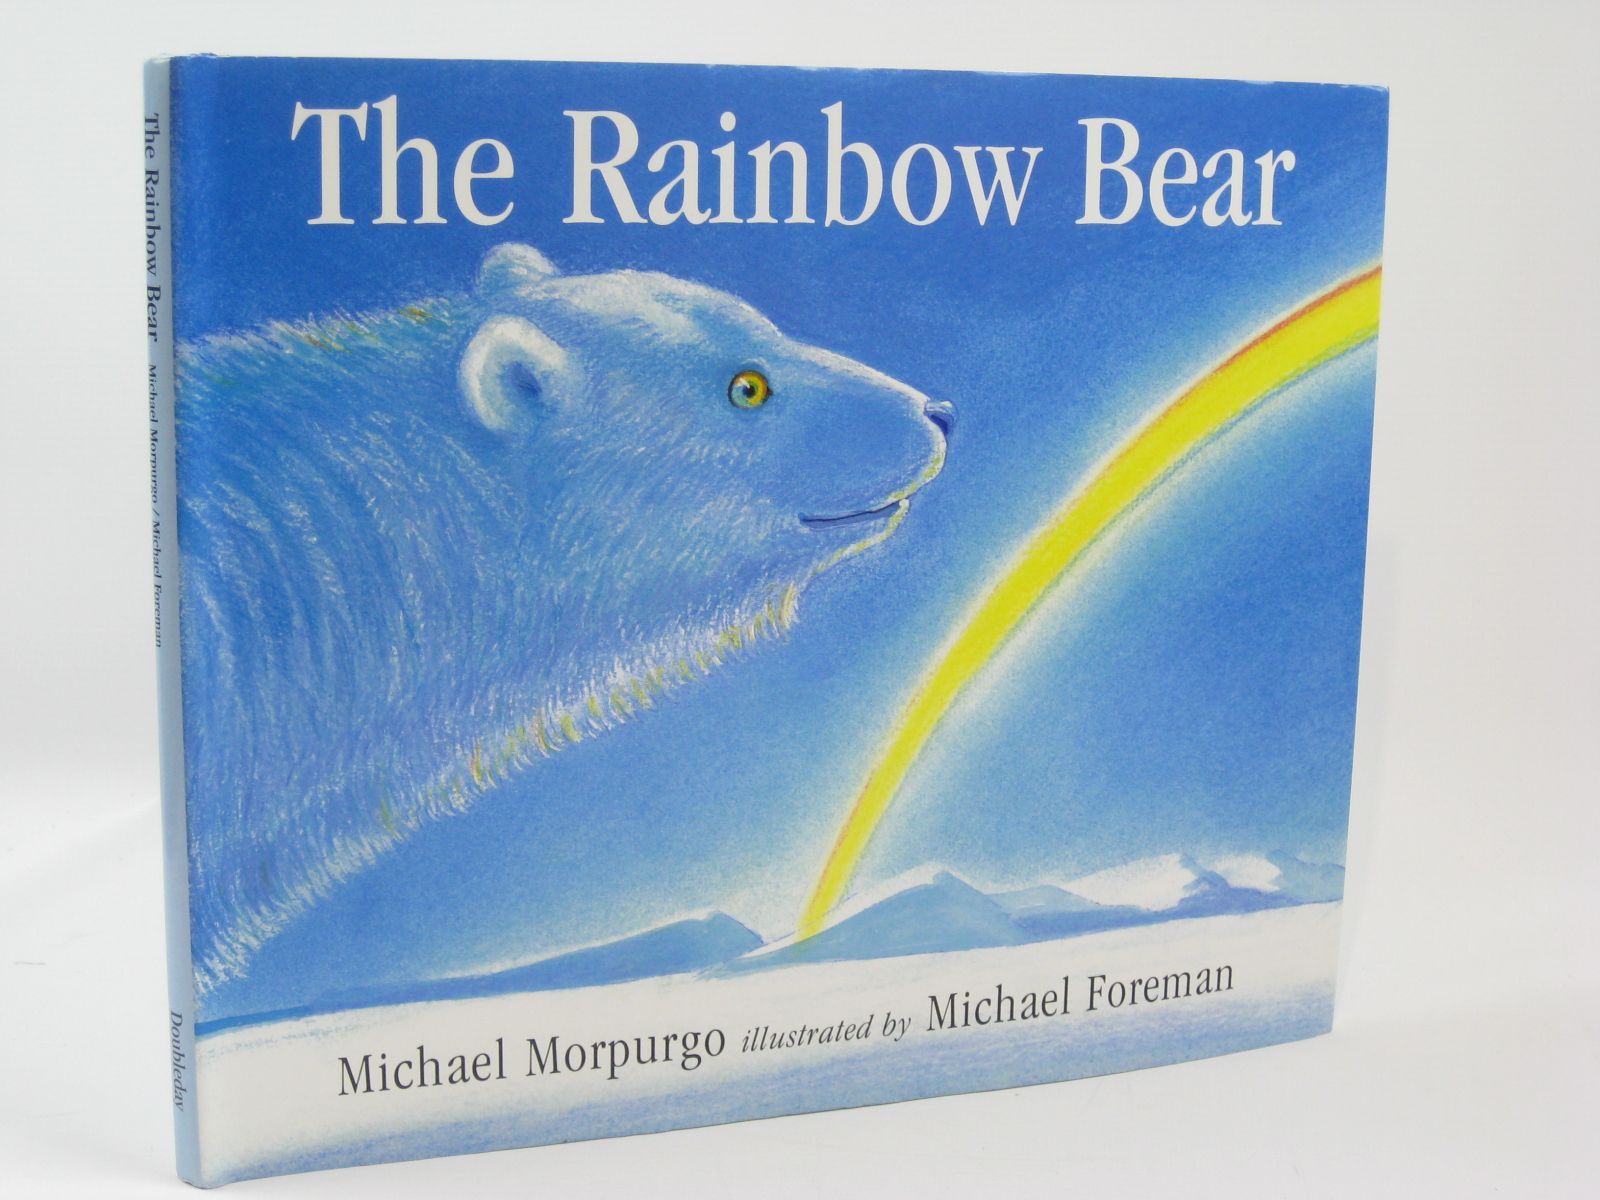 Photo of THE RAINBOW BEAR written by Morpurgo, Michael illustrated by Foreman, Michael published by Doubleday (STOCK CODE: 1406228)  for sale by Stella & Rose's Books